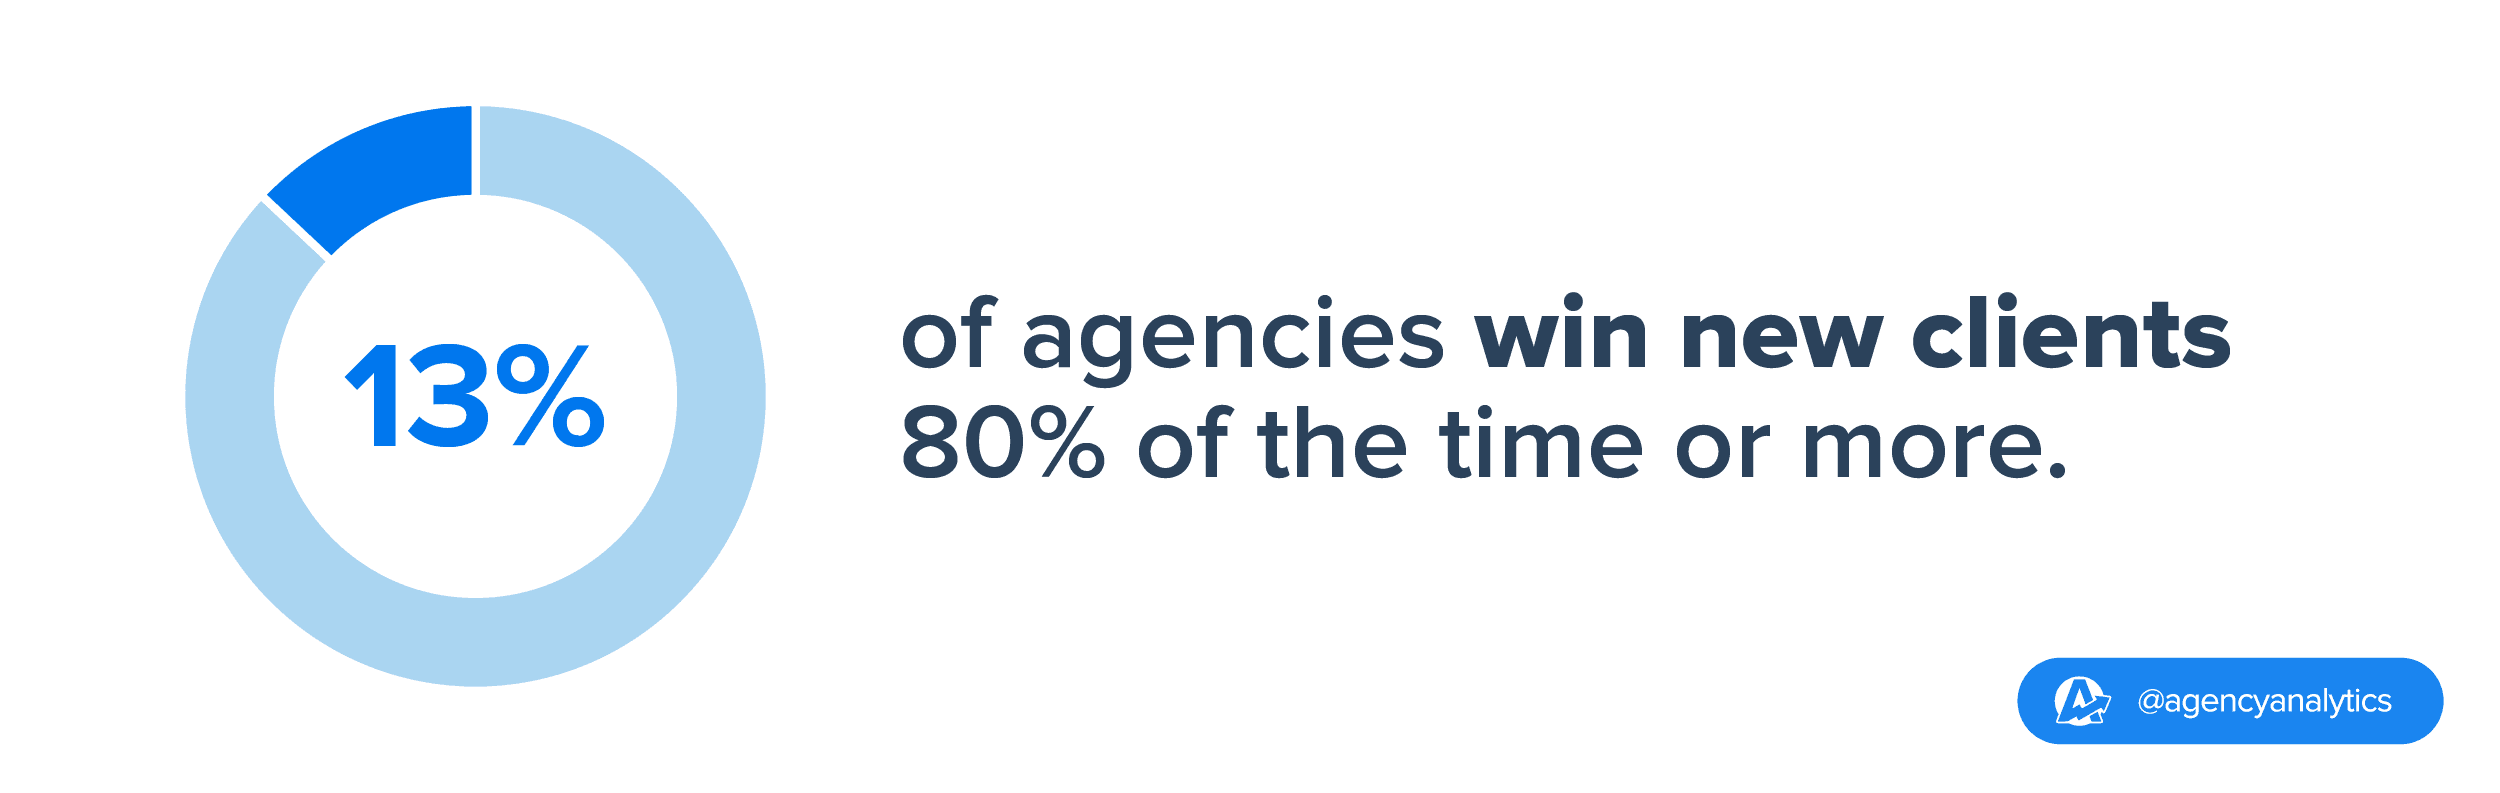 13% of agencies have a win rate of 80% or higher